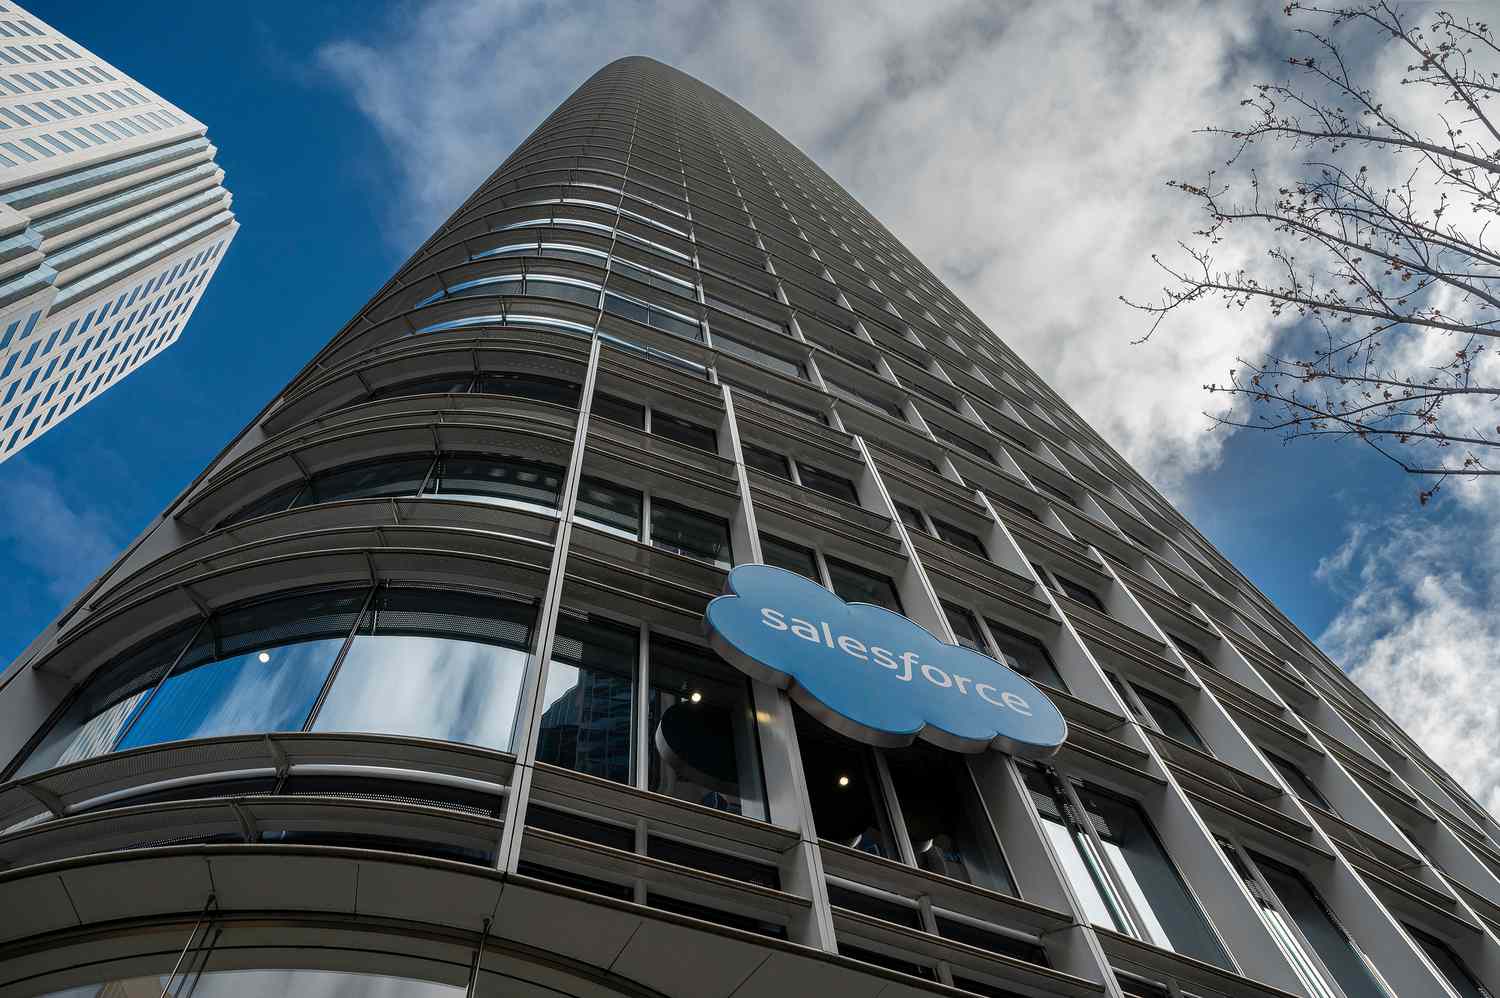 What To Expect From Salesforce’s Annual Shareholder Meeting Thursday [Video]